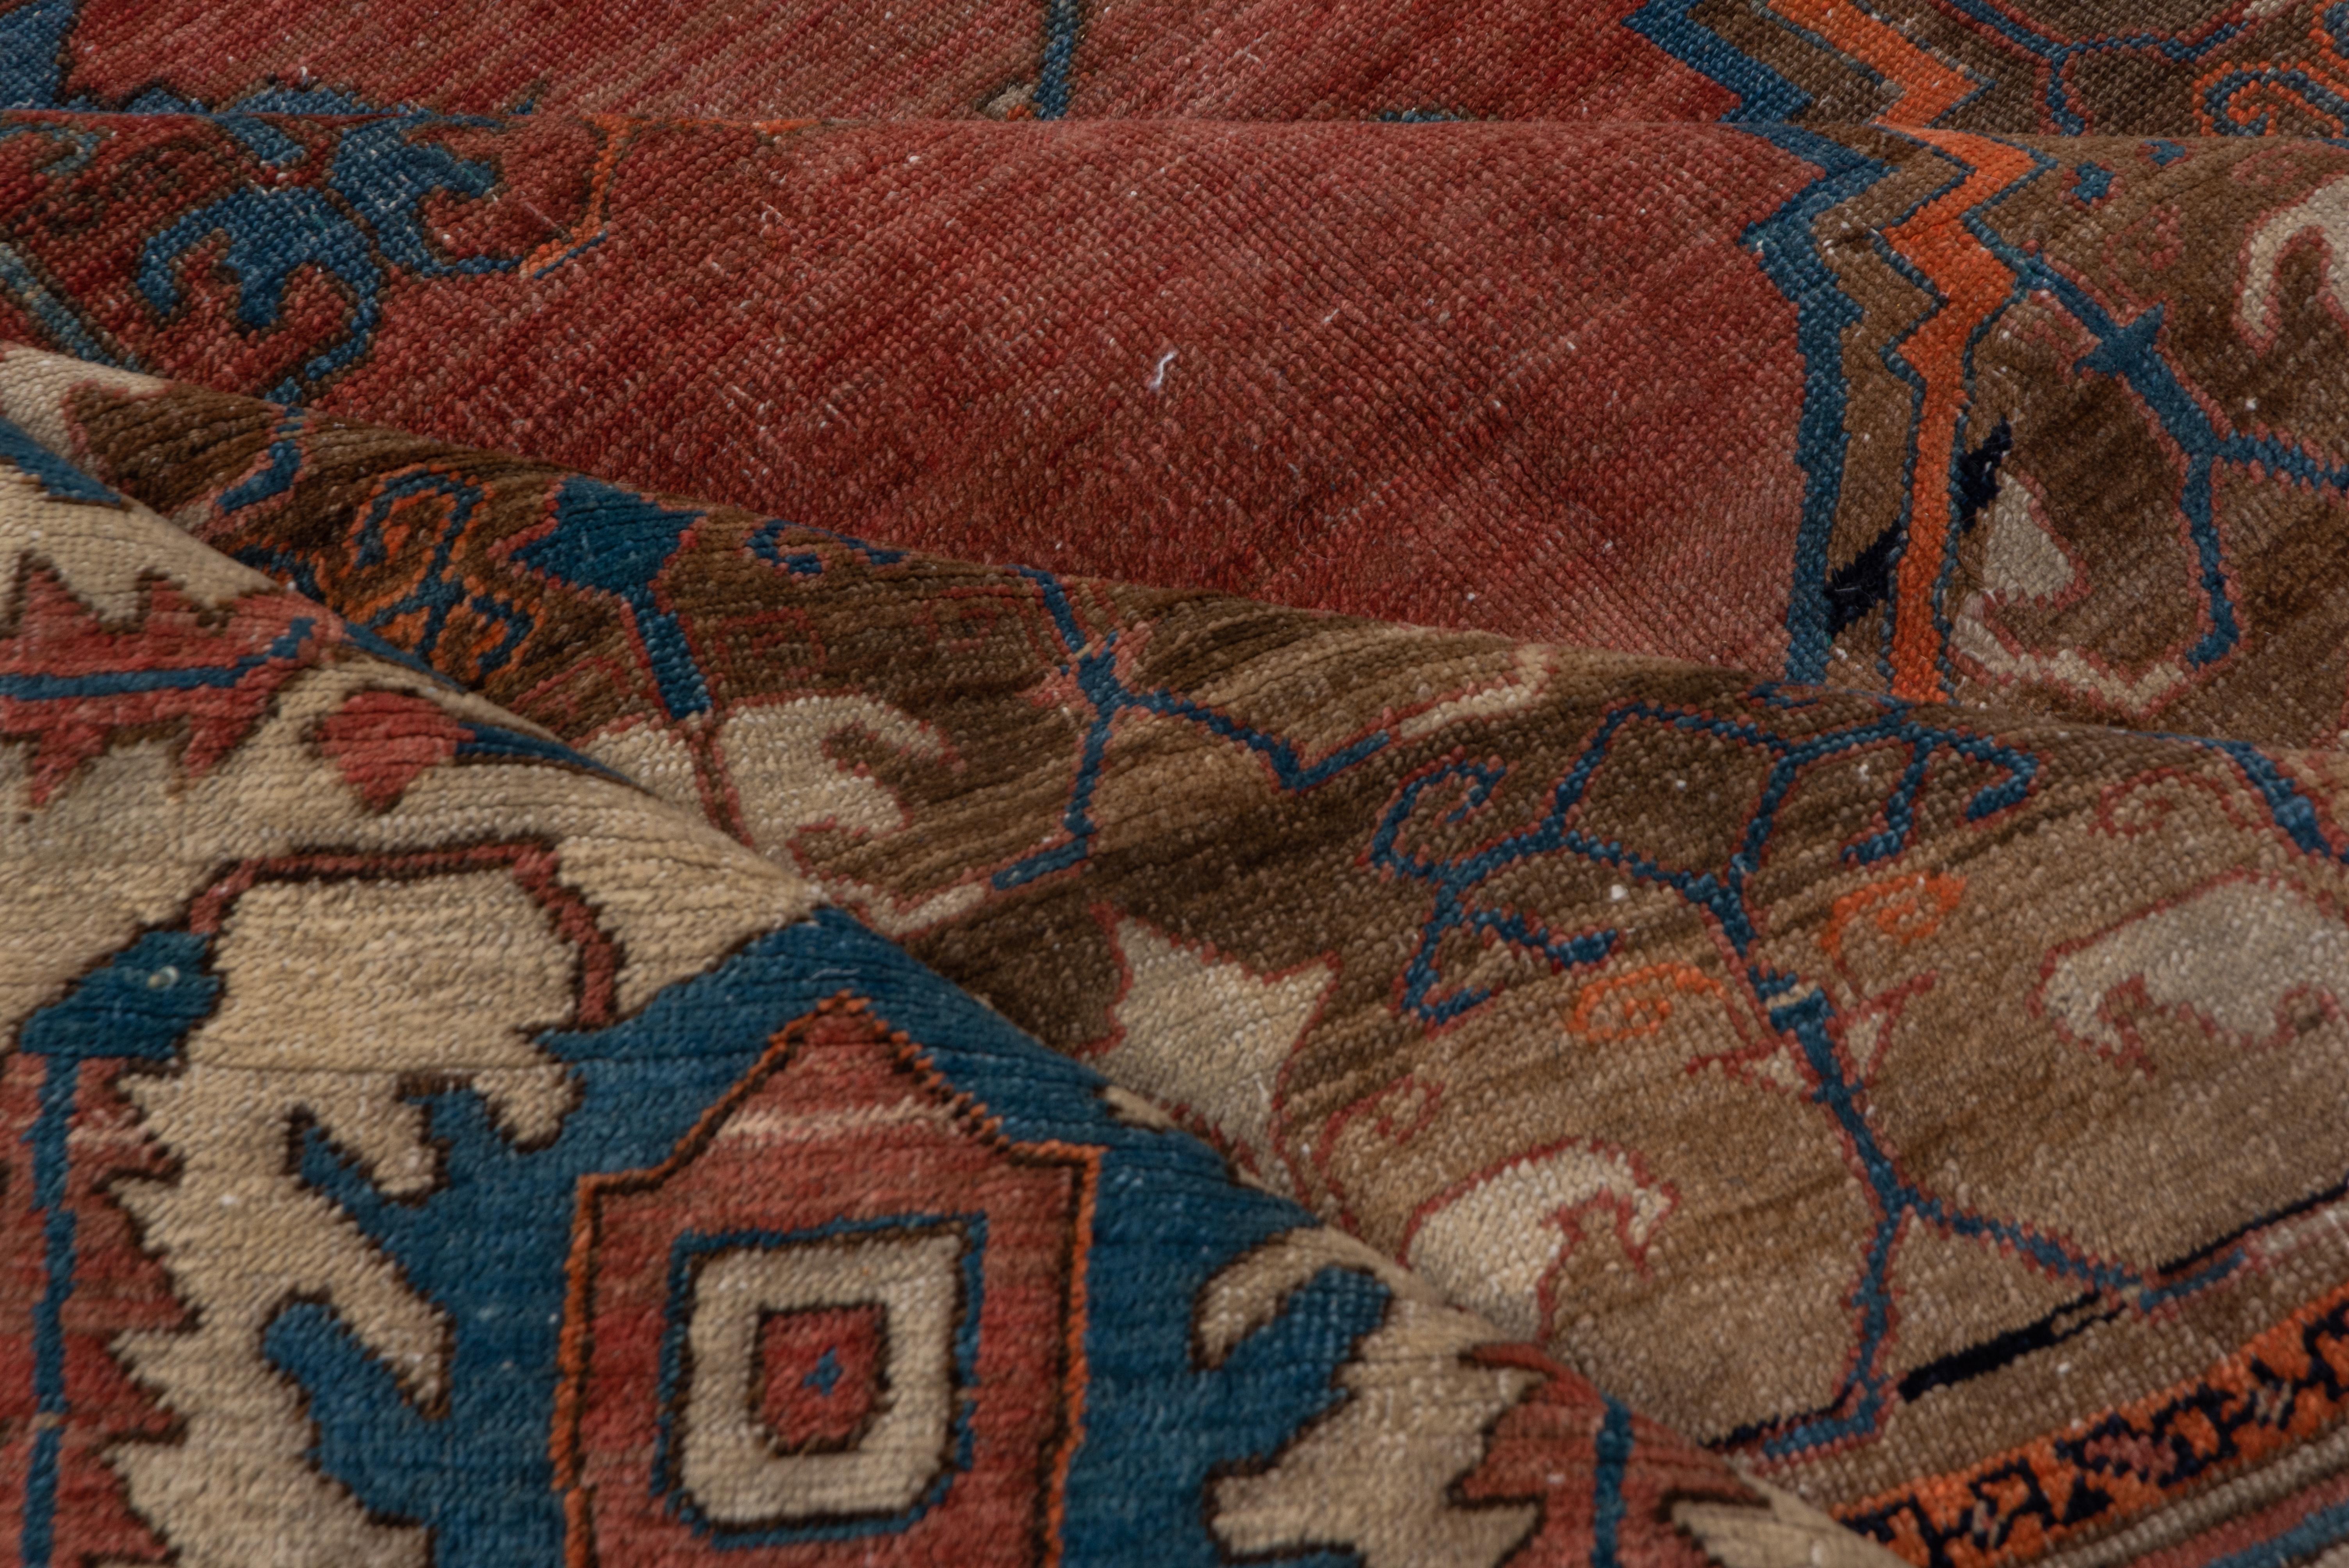 Bakhshayeh carpets are an older and more Primitive version of antique Serapi and heriz carpets. They circle back to the 1800s. The abrashed and stepped red subfield fits neatly into the primarily dark brown field with its unusual floral repeat